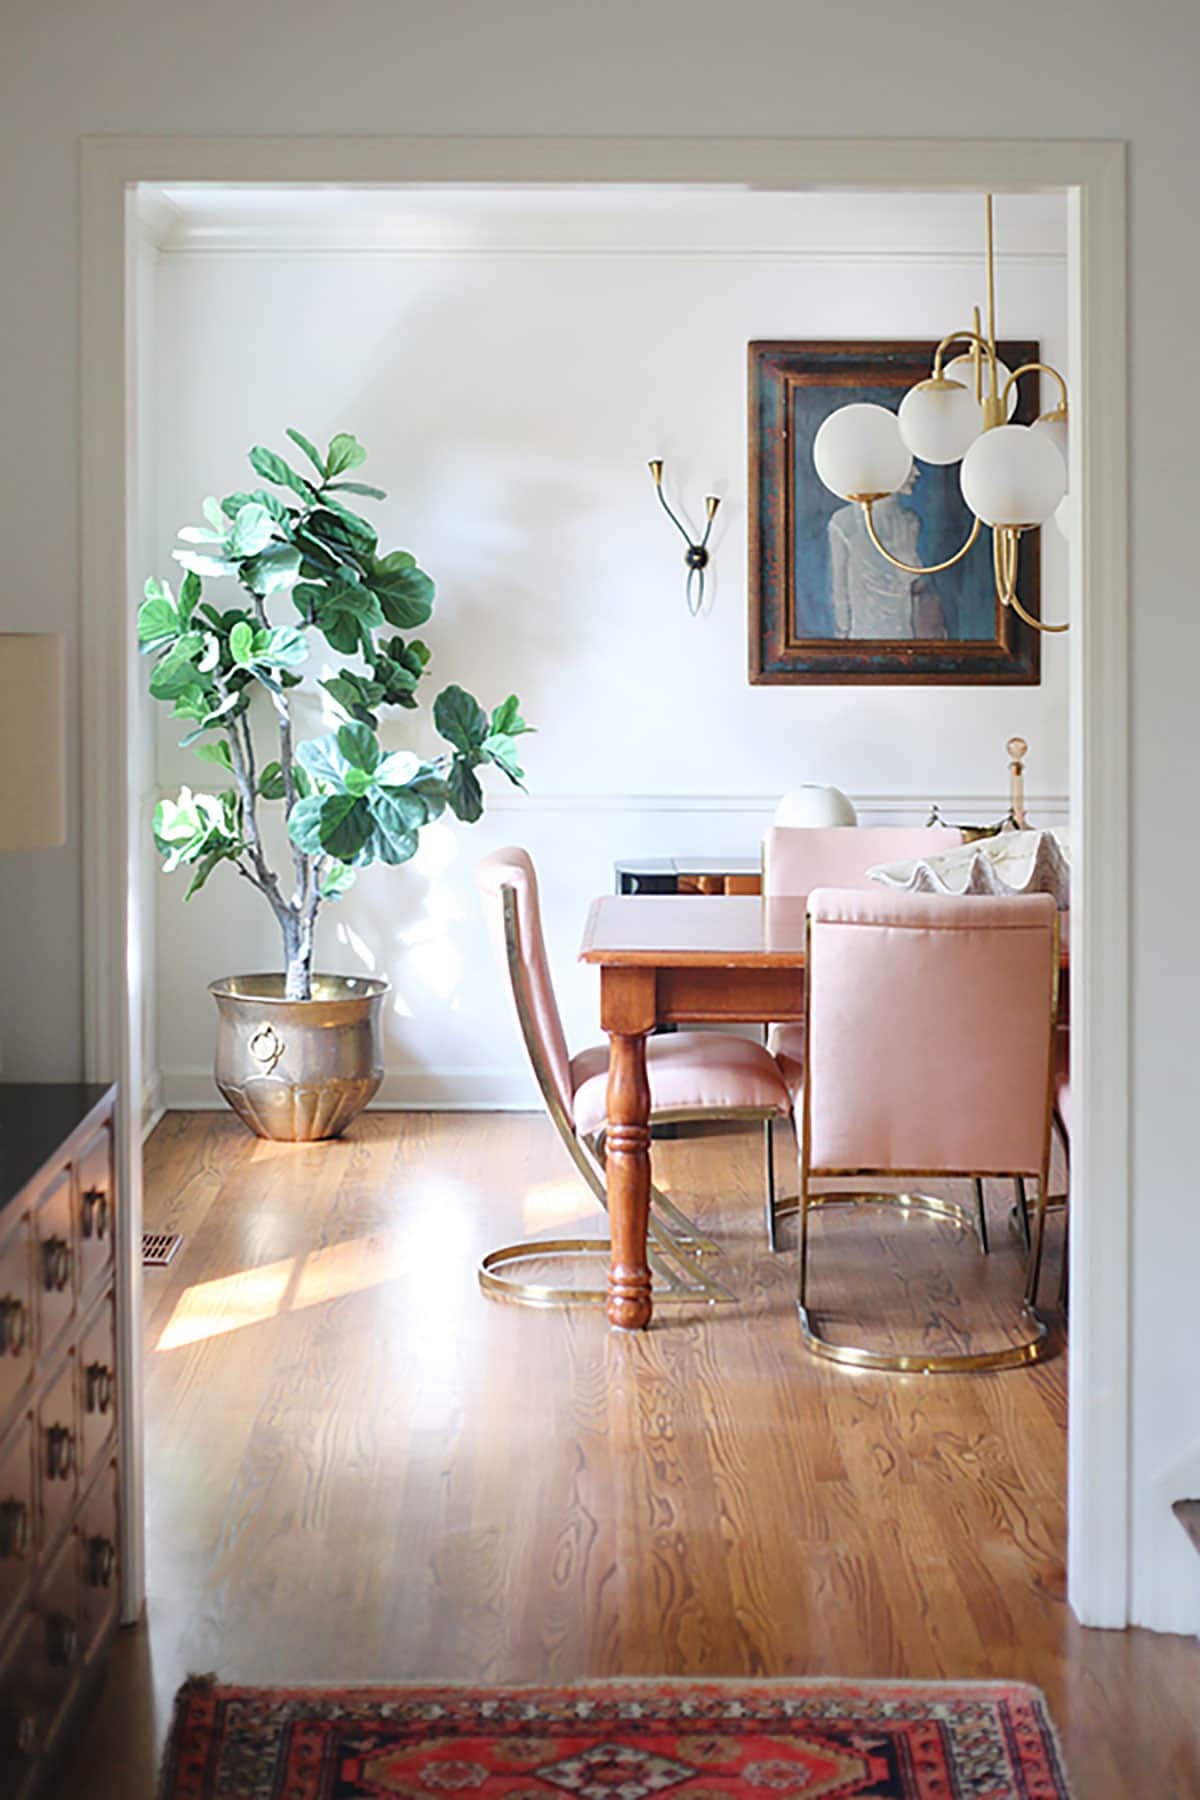 No Makeup Home Tour hosted by House of Hipsters — what a blogger's home looks like in real life.